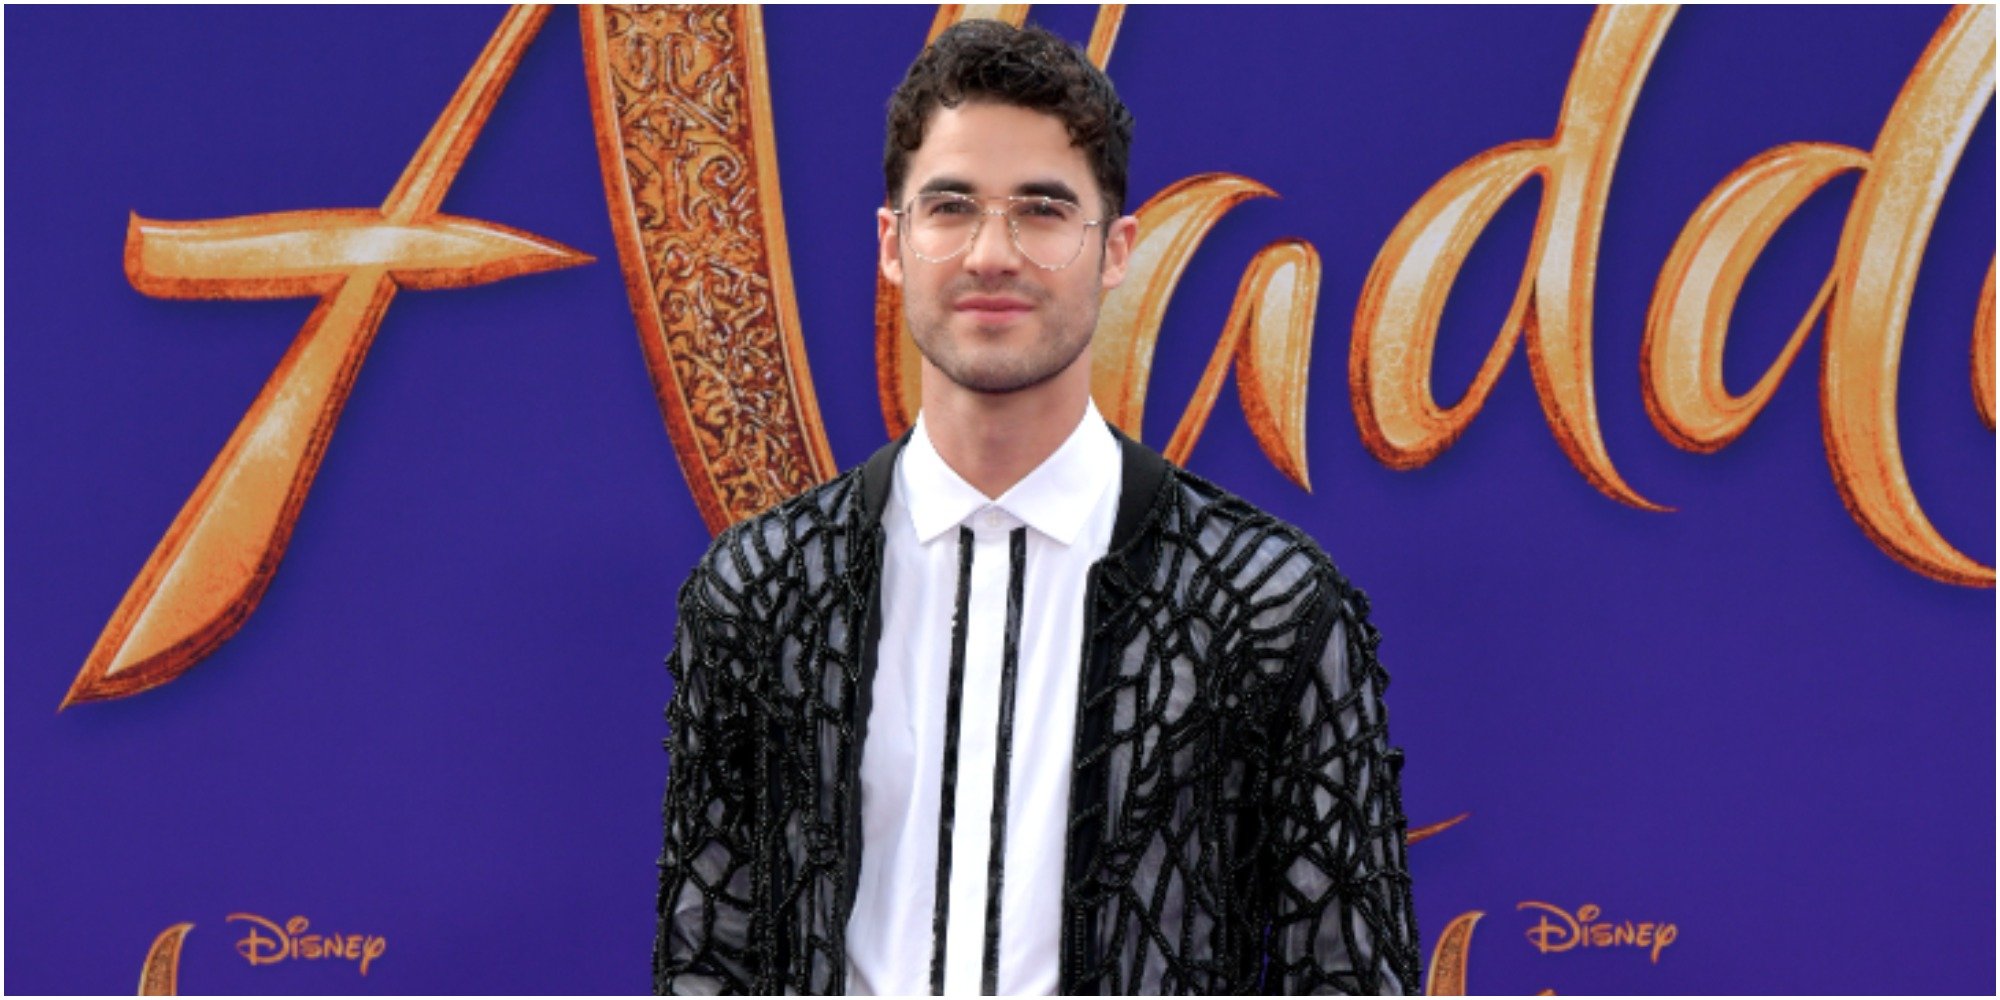 Darren Criss will be one of the celebrity performers who will appear on the 74th annual Tony Awards.